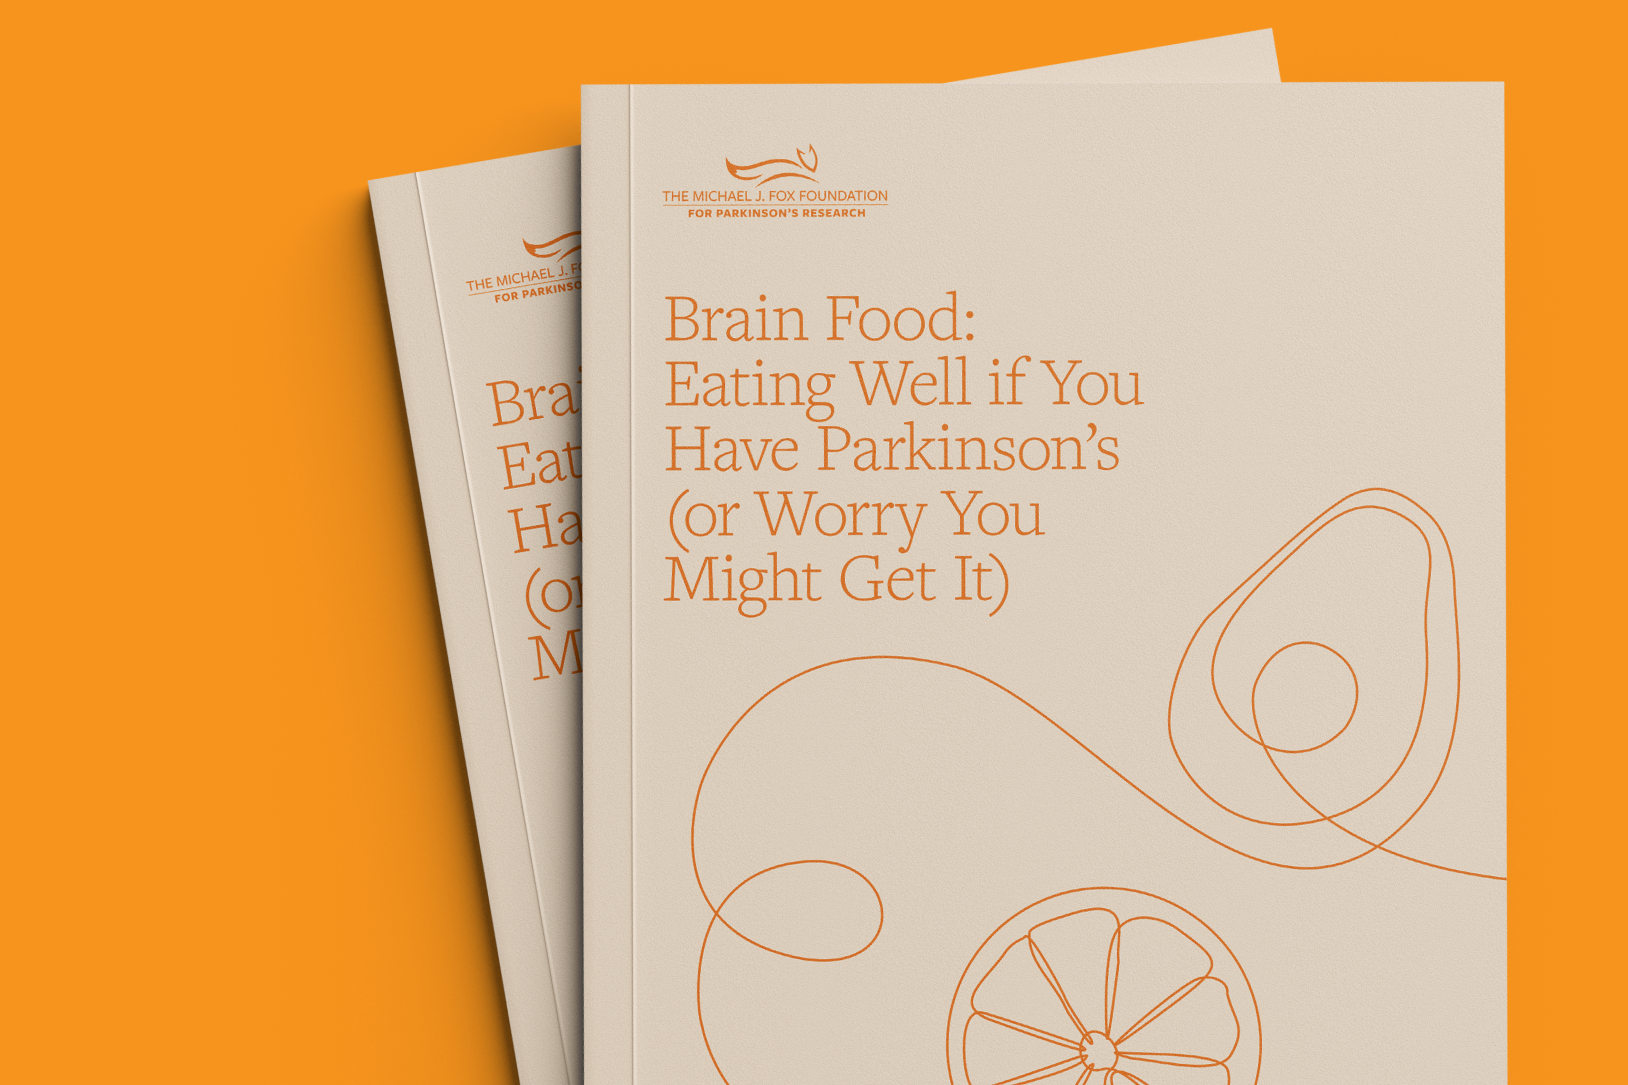 Brain Food: Eating Well if you have Parkinson's